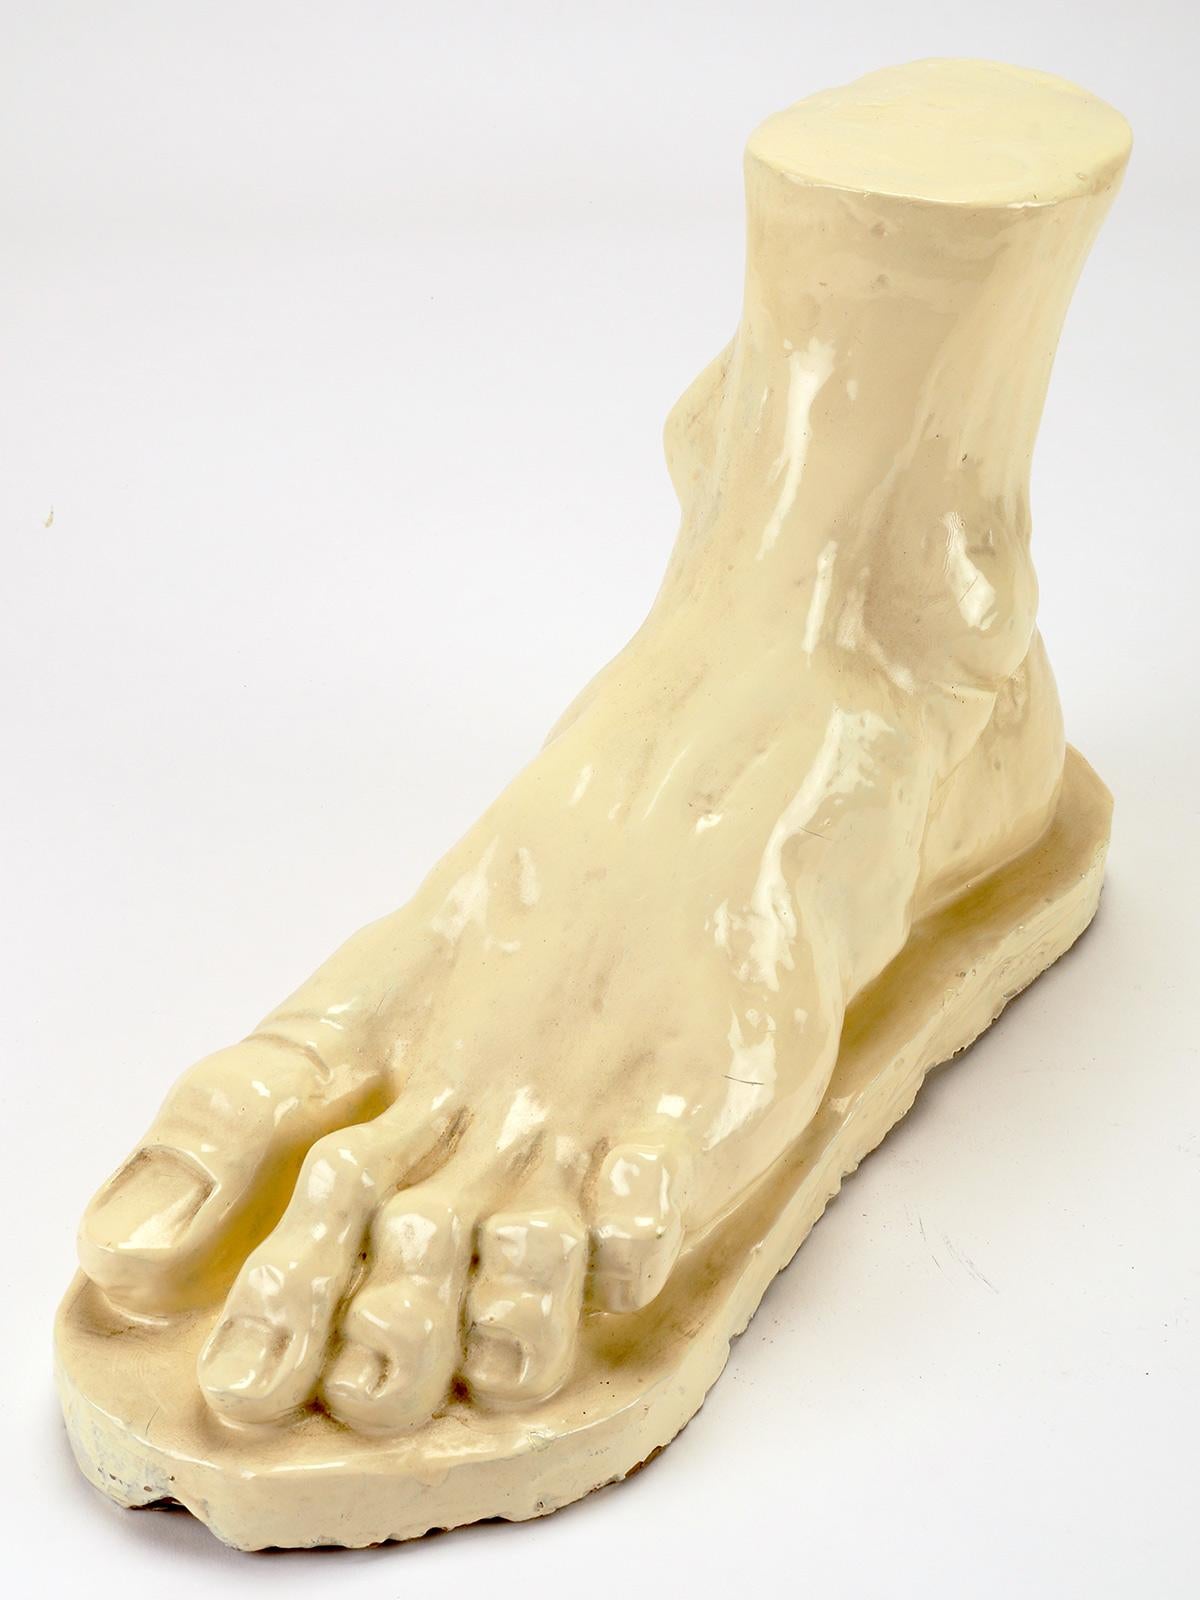 20th Century Glazed Clay Sculpture Depicting a Foot, Italy, 1900 For Sale